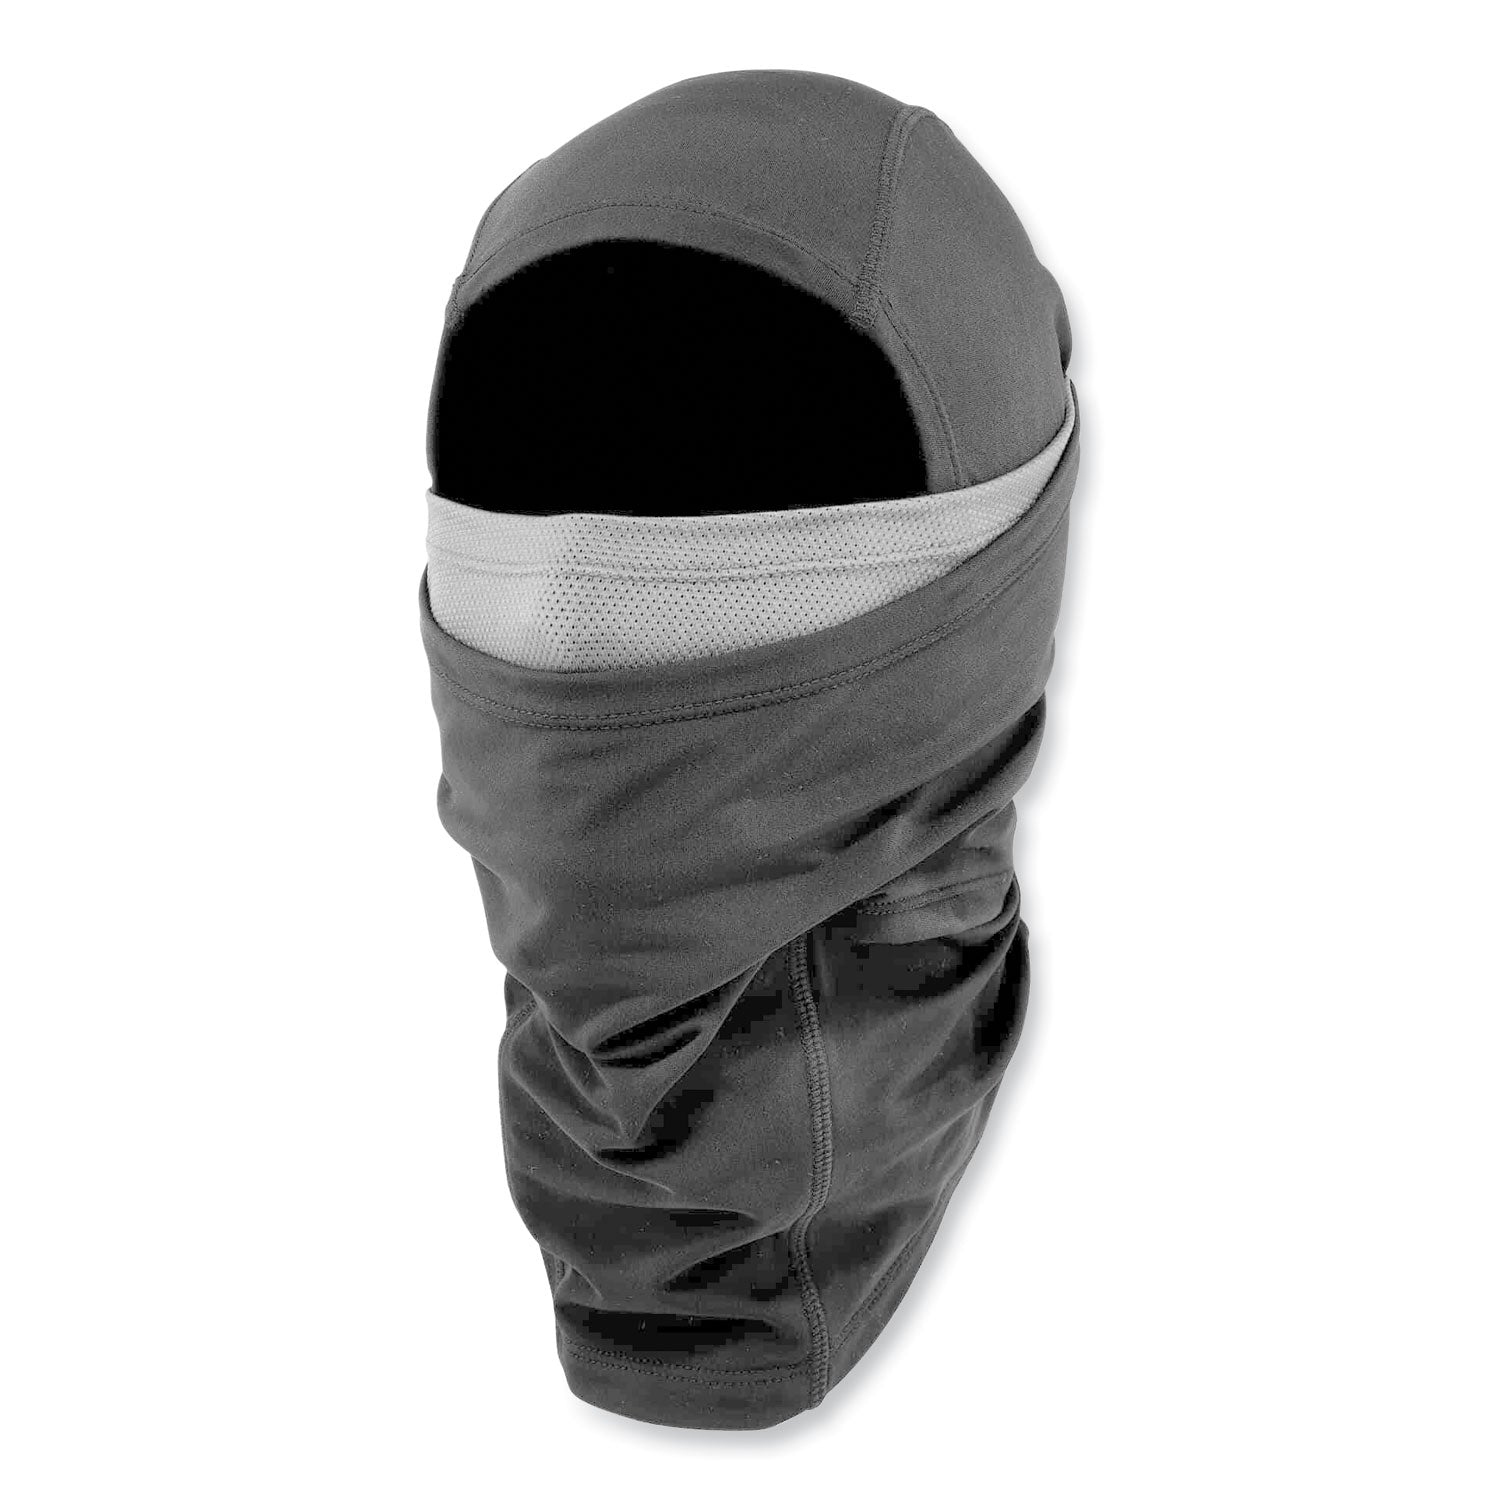 n-ferno-6844-dual-layer-balaclava-face-mask-nylon;-spandex-one-size-fits-most-black-ships-in-1-3-business-days_ego16844 - 1